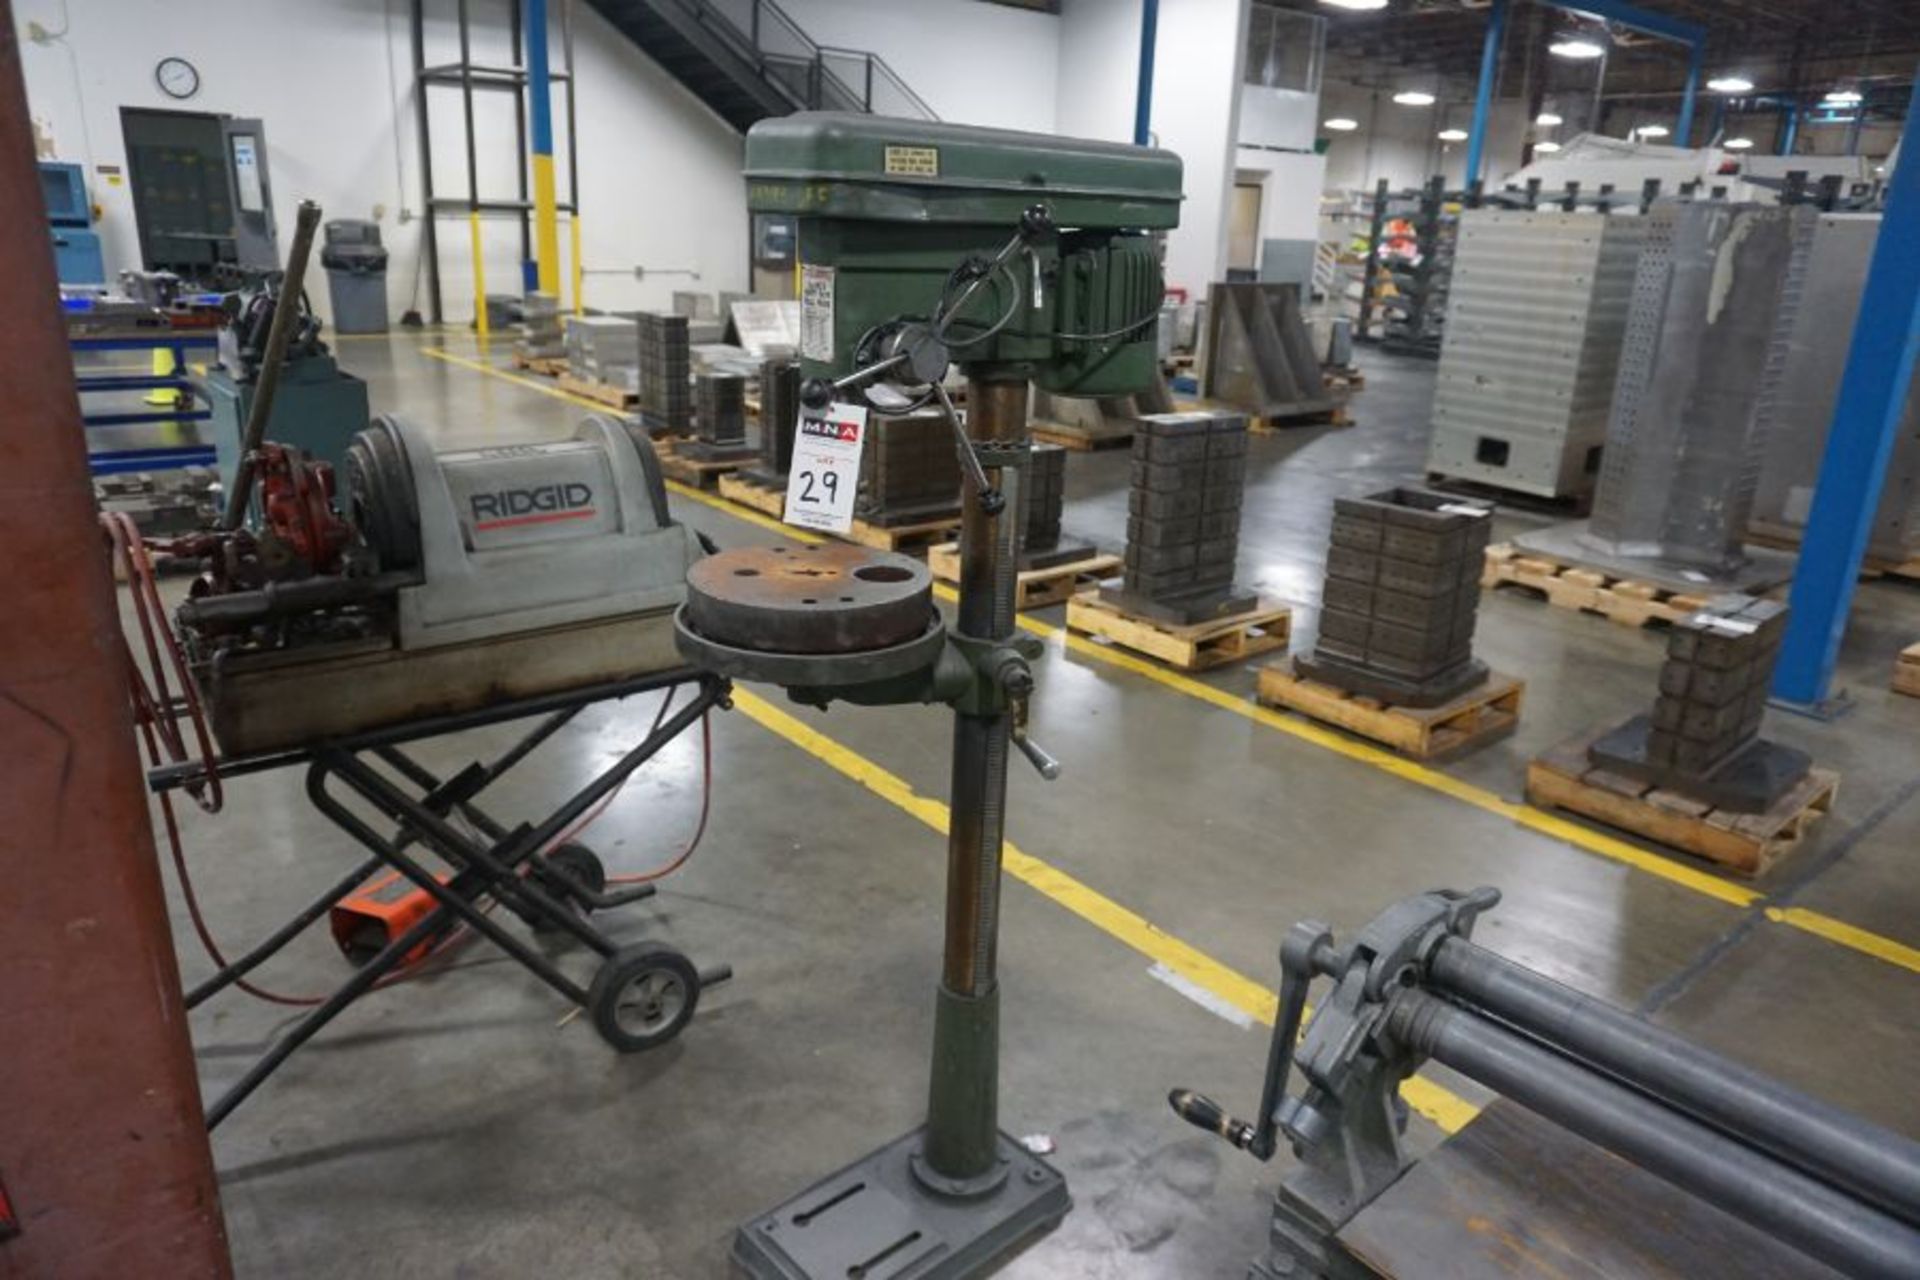 Central Machinery 16 Speed Drill Press